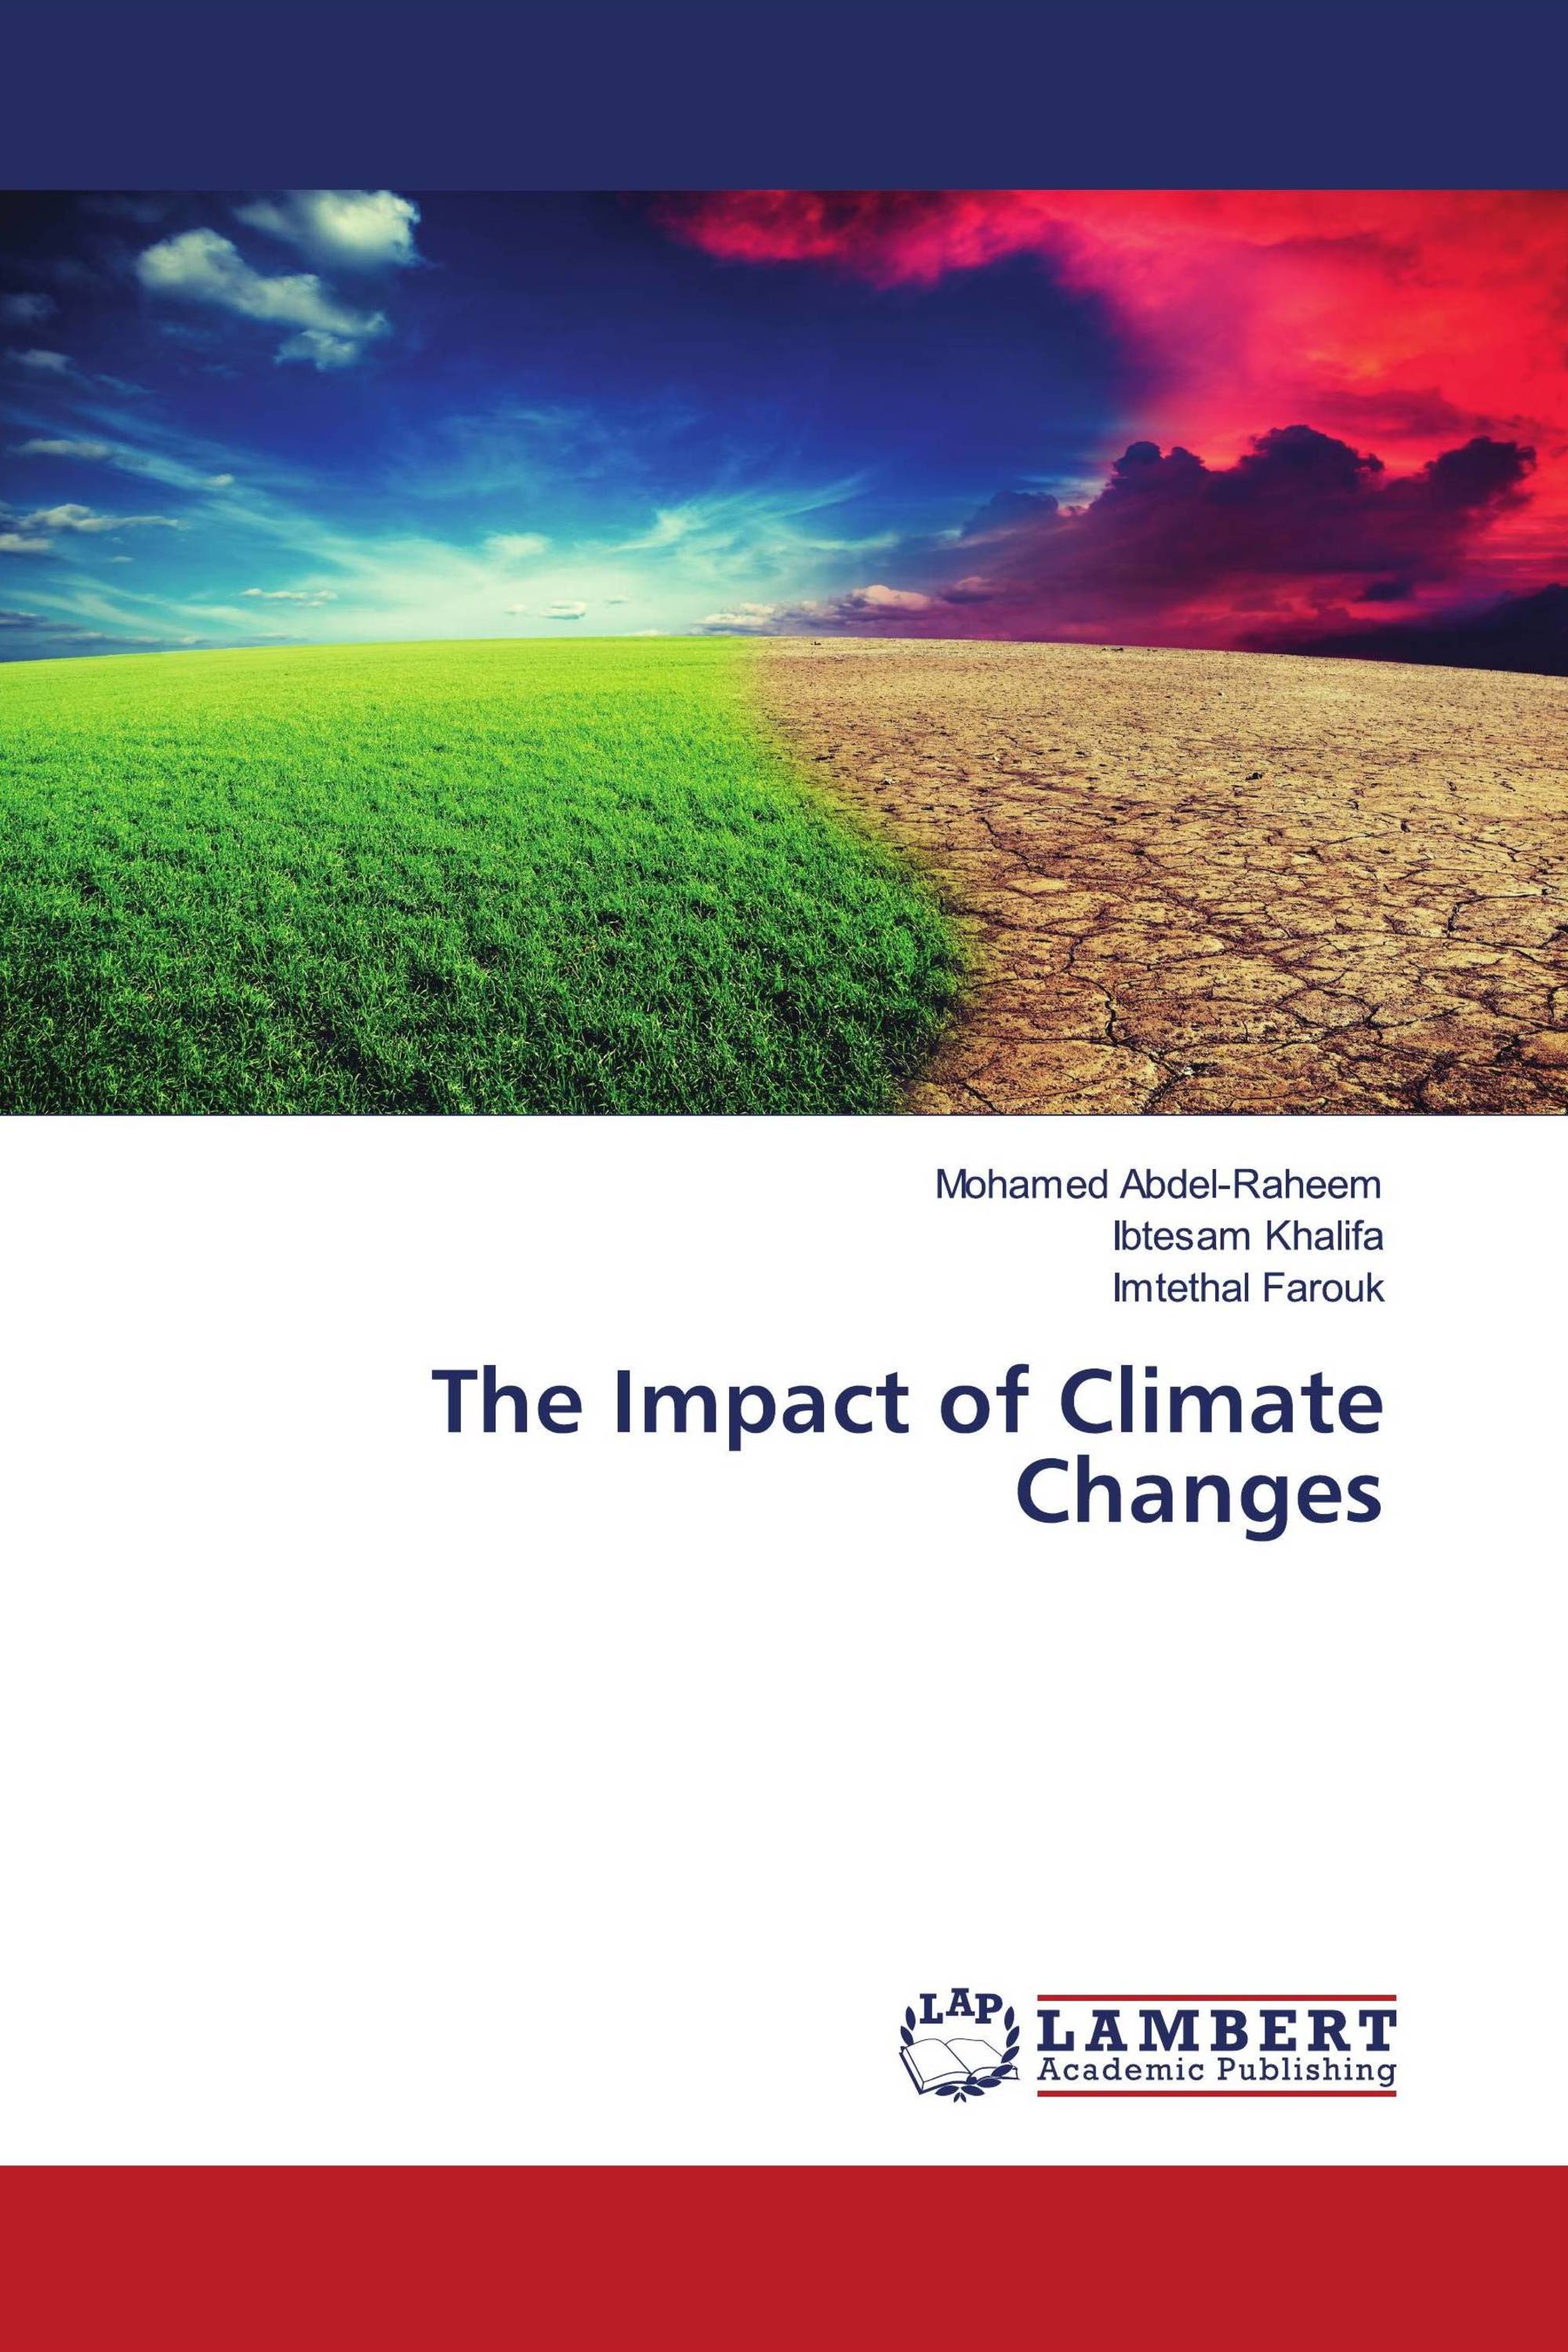 The Impact of Climate Changes